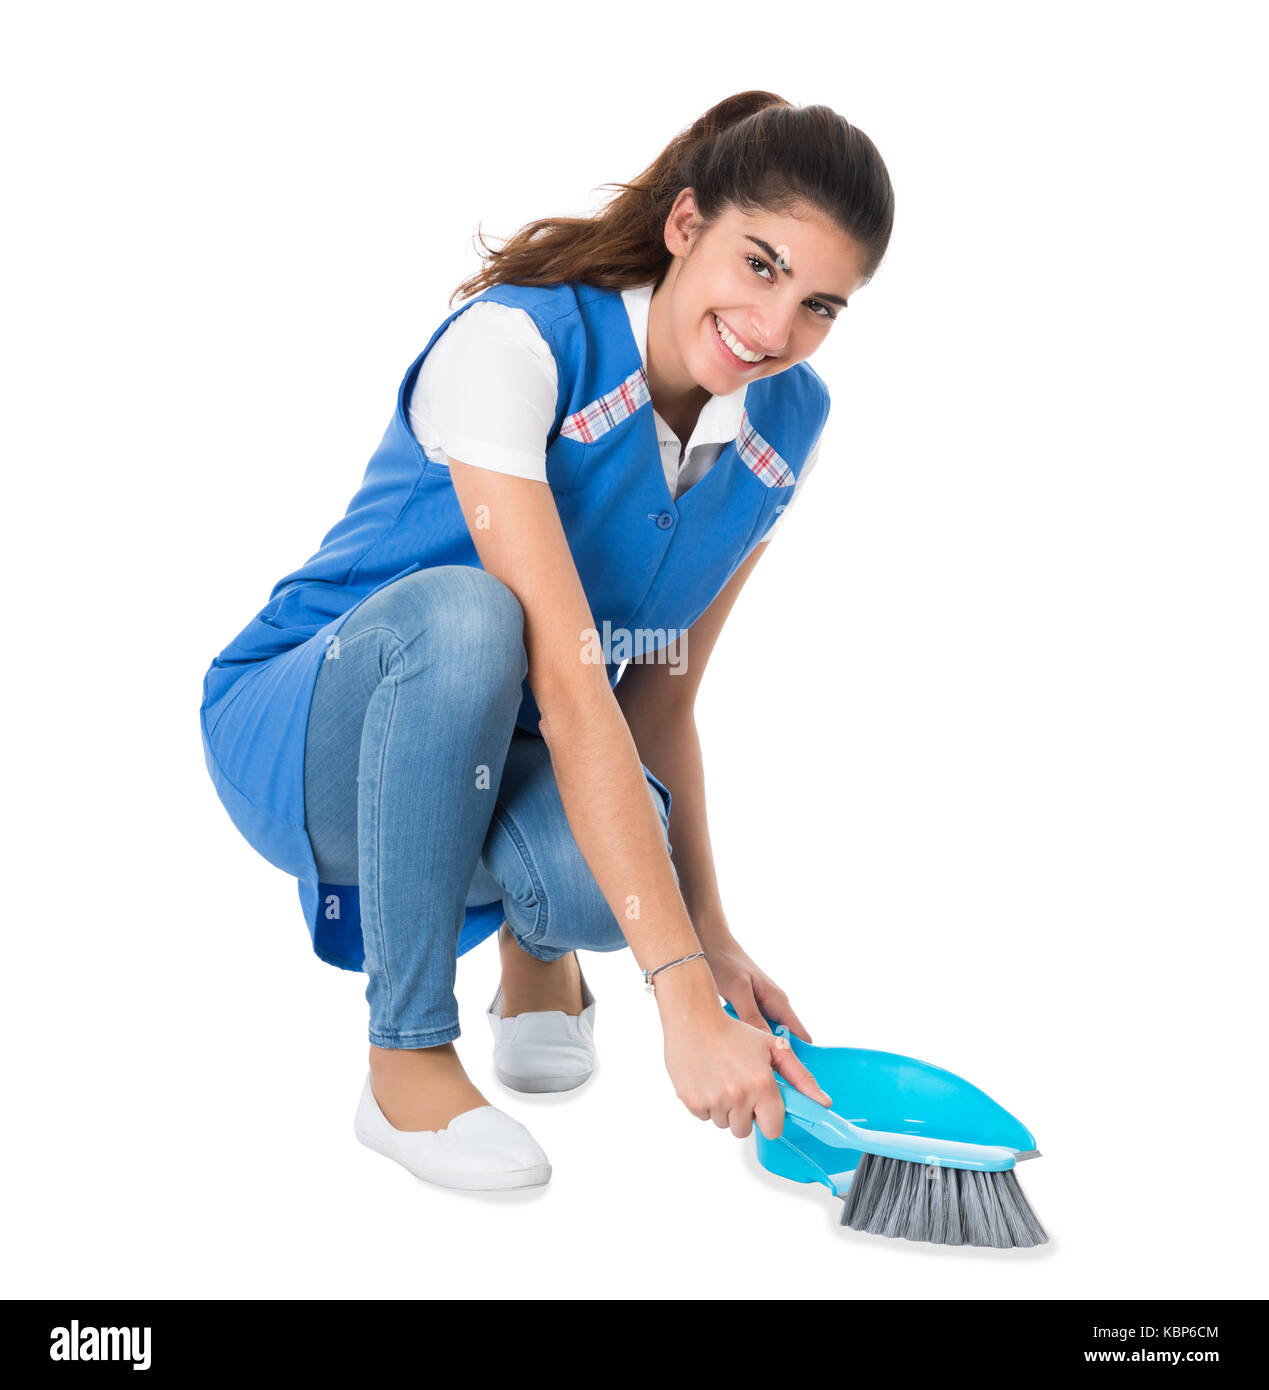 Full length of young female cleaner sweeping with small broom and dustpan on white background Stock Photo